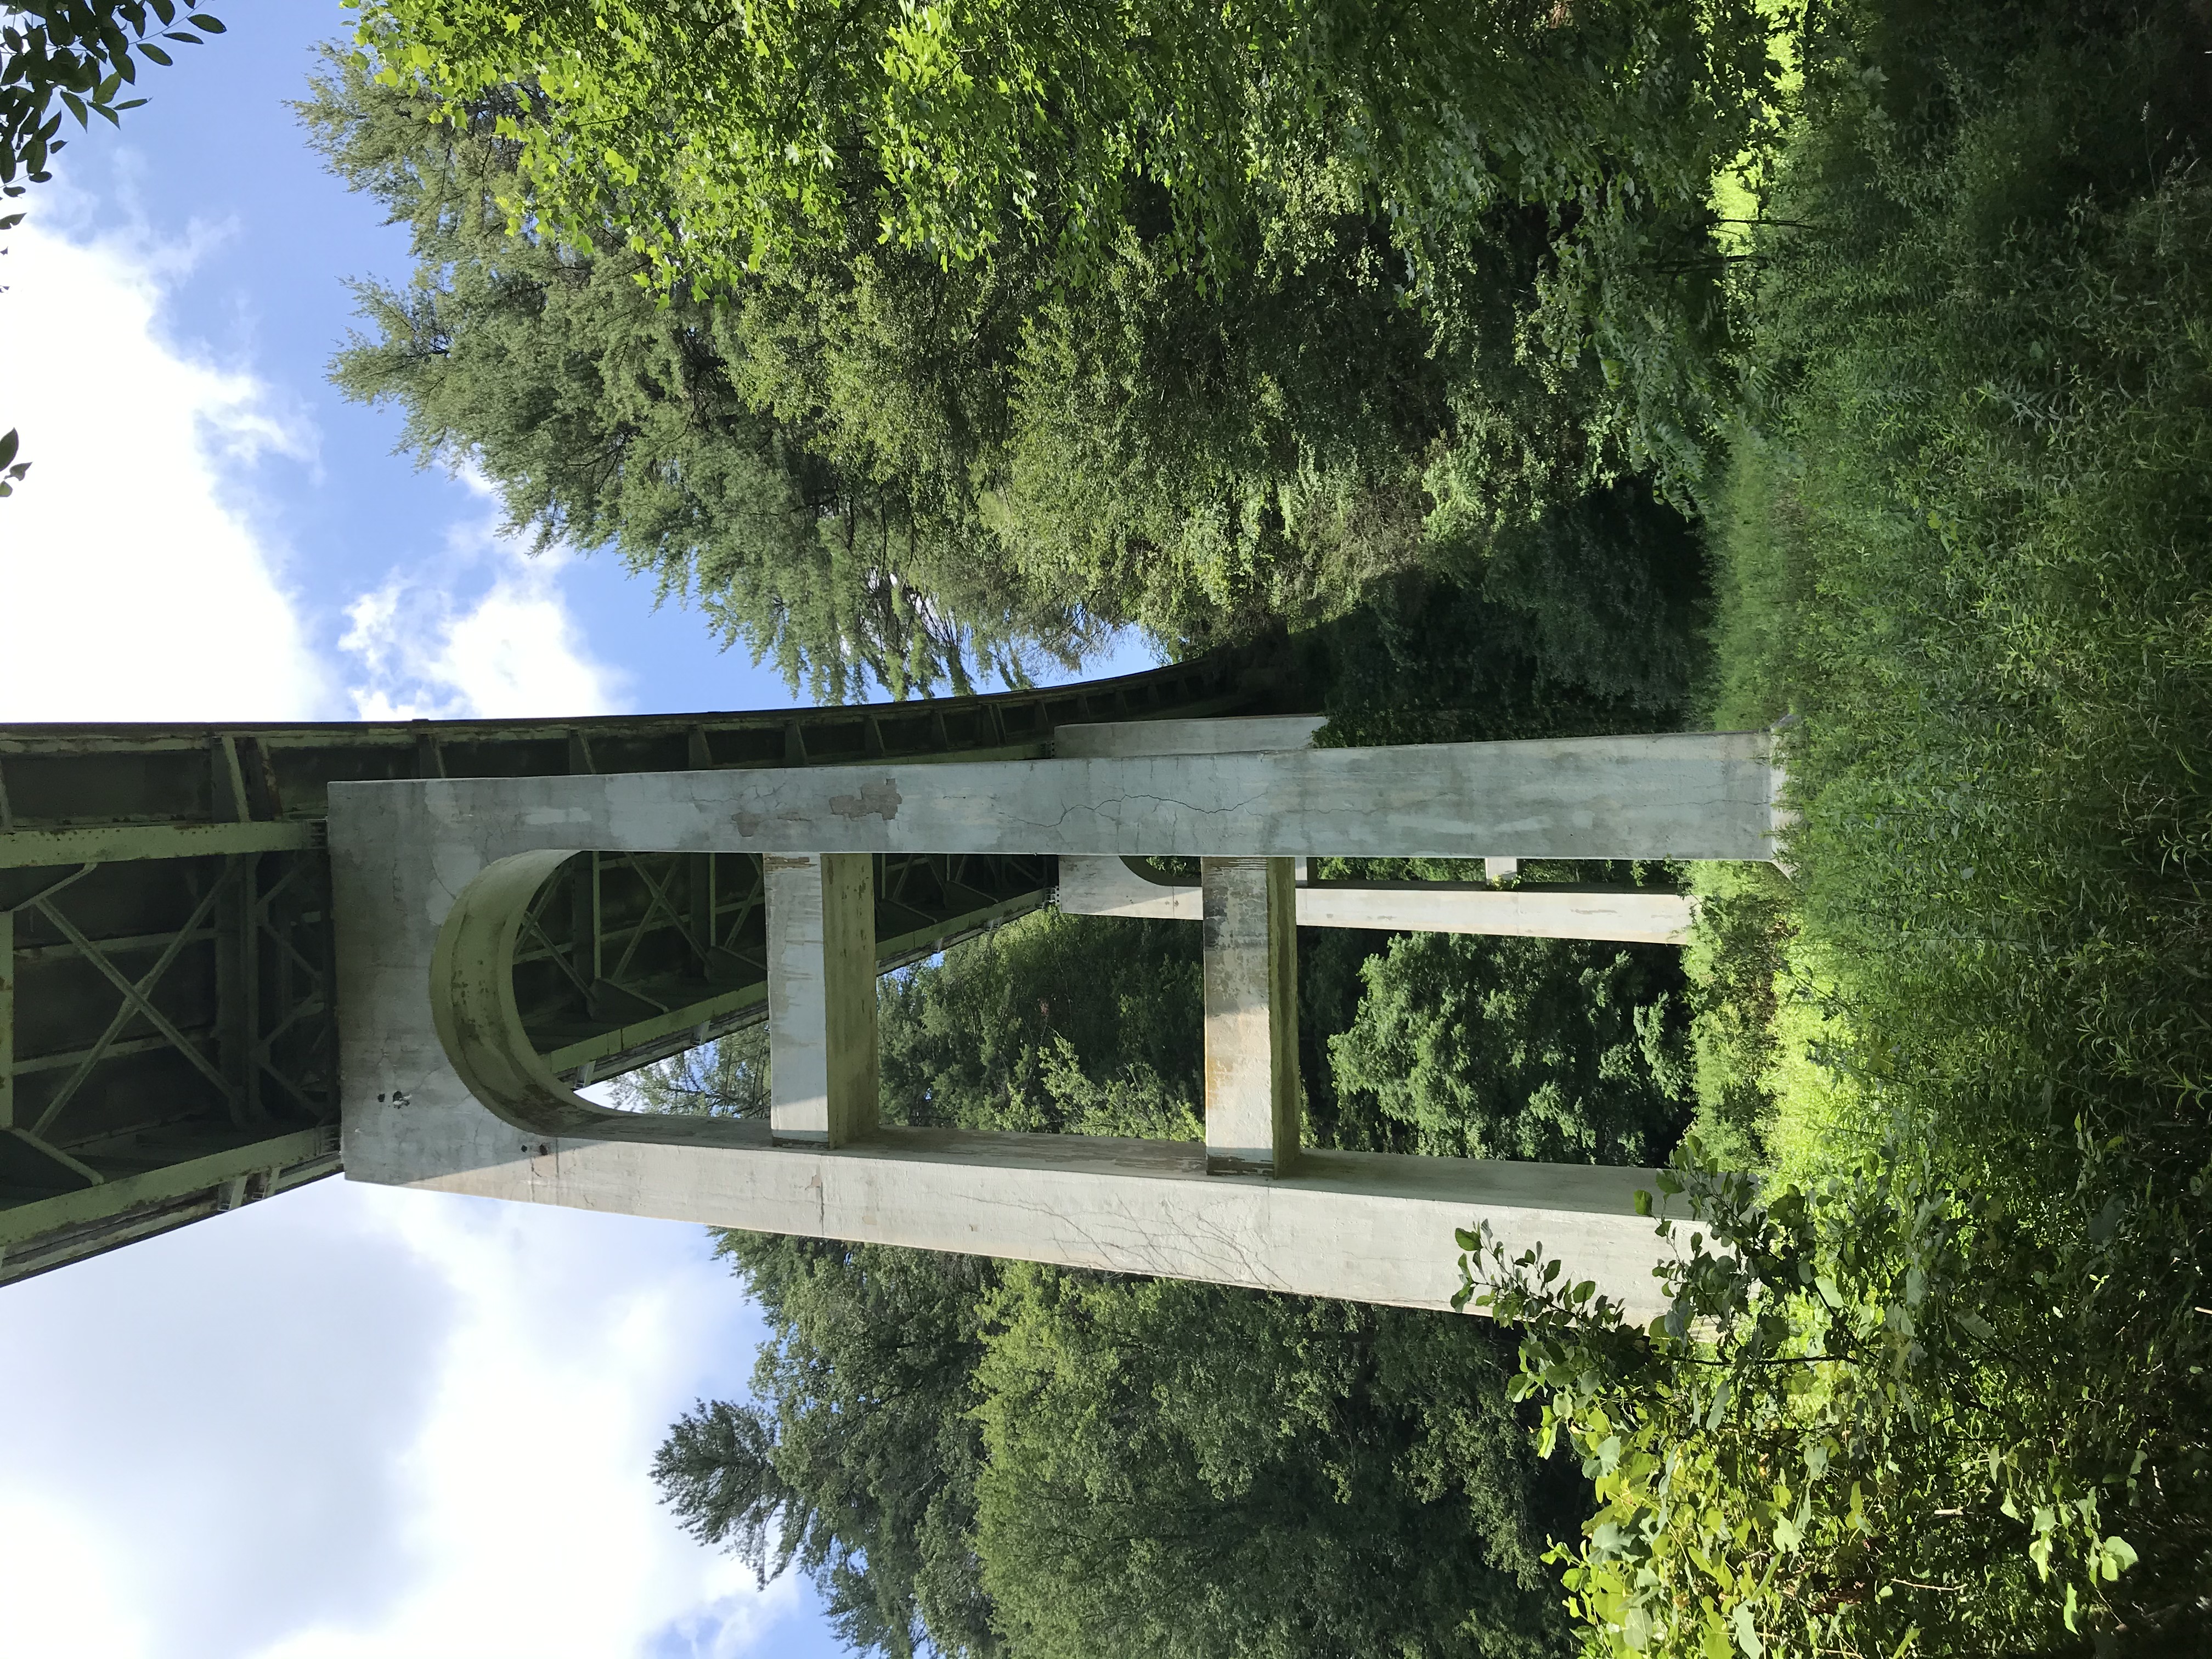 The tall, concrete legs of a bridge with green trees.